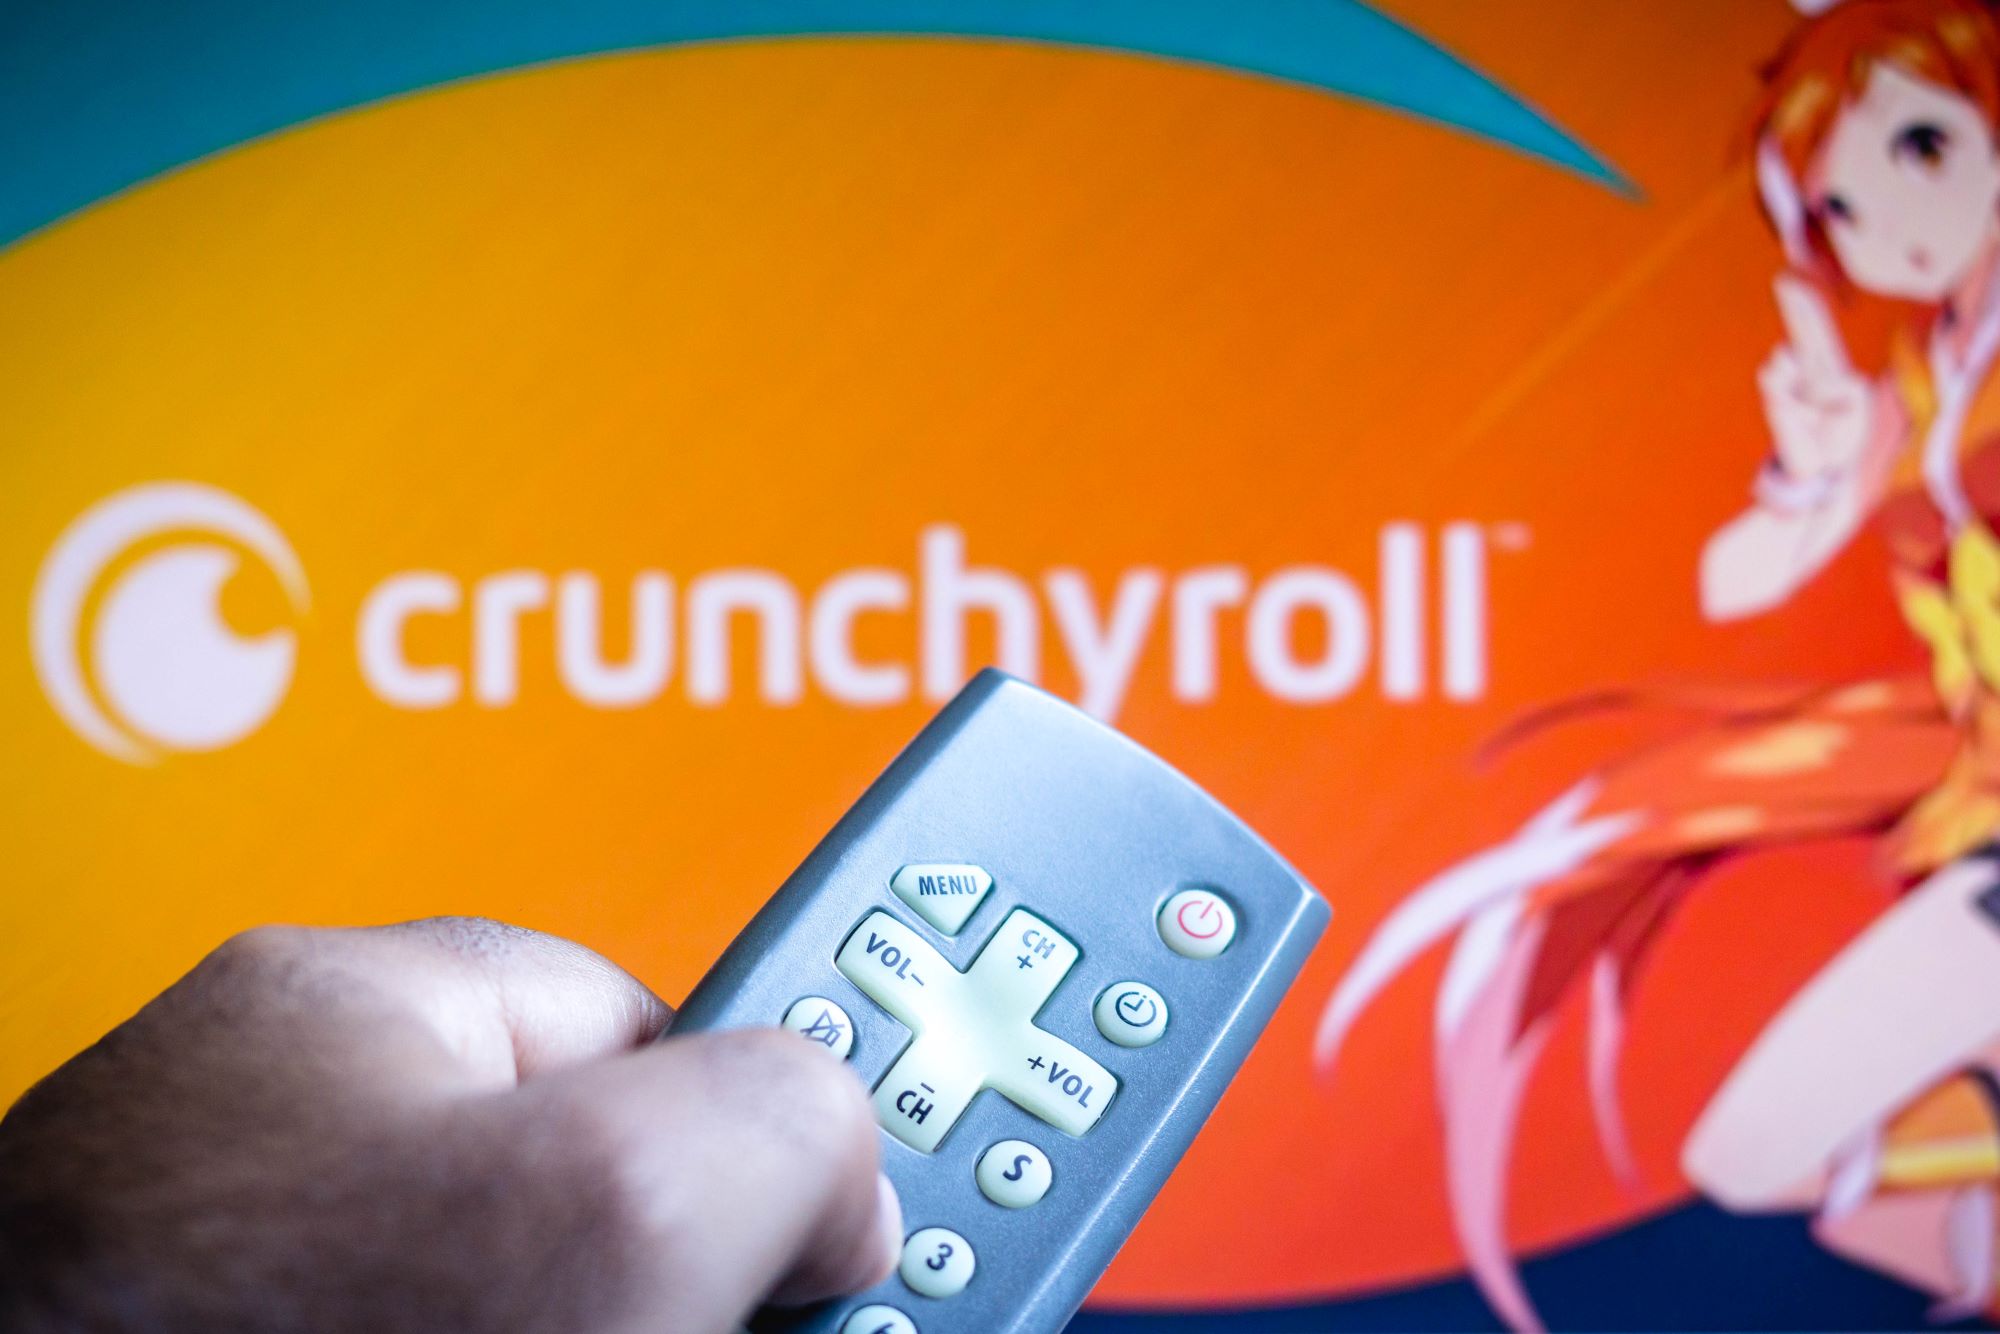 A Crunchyroll logo banner for the anime streaming site with a handing holding a remote control in front of it